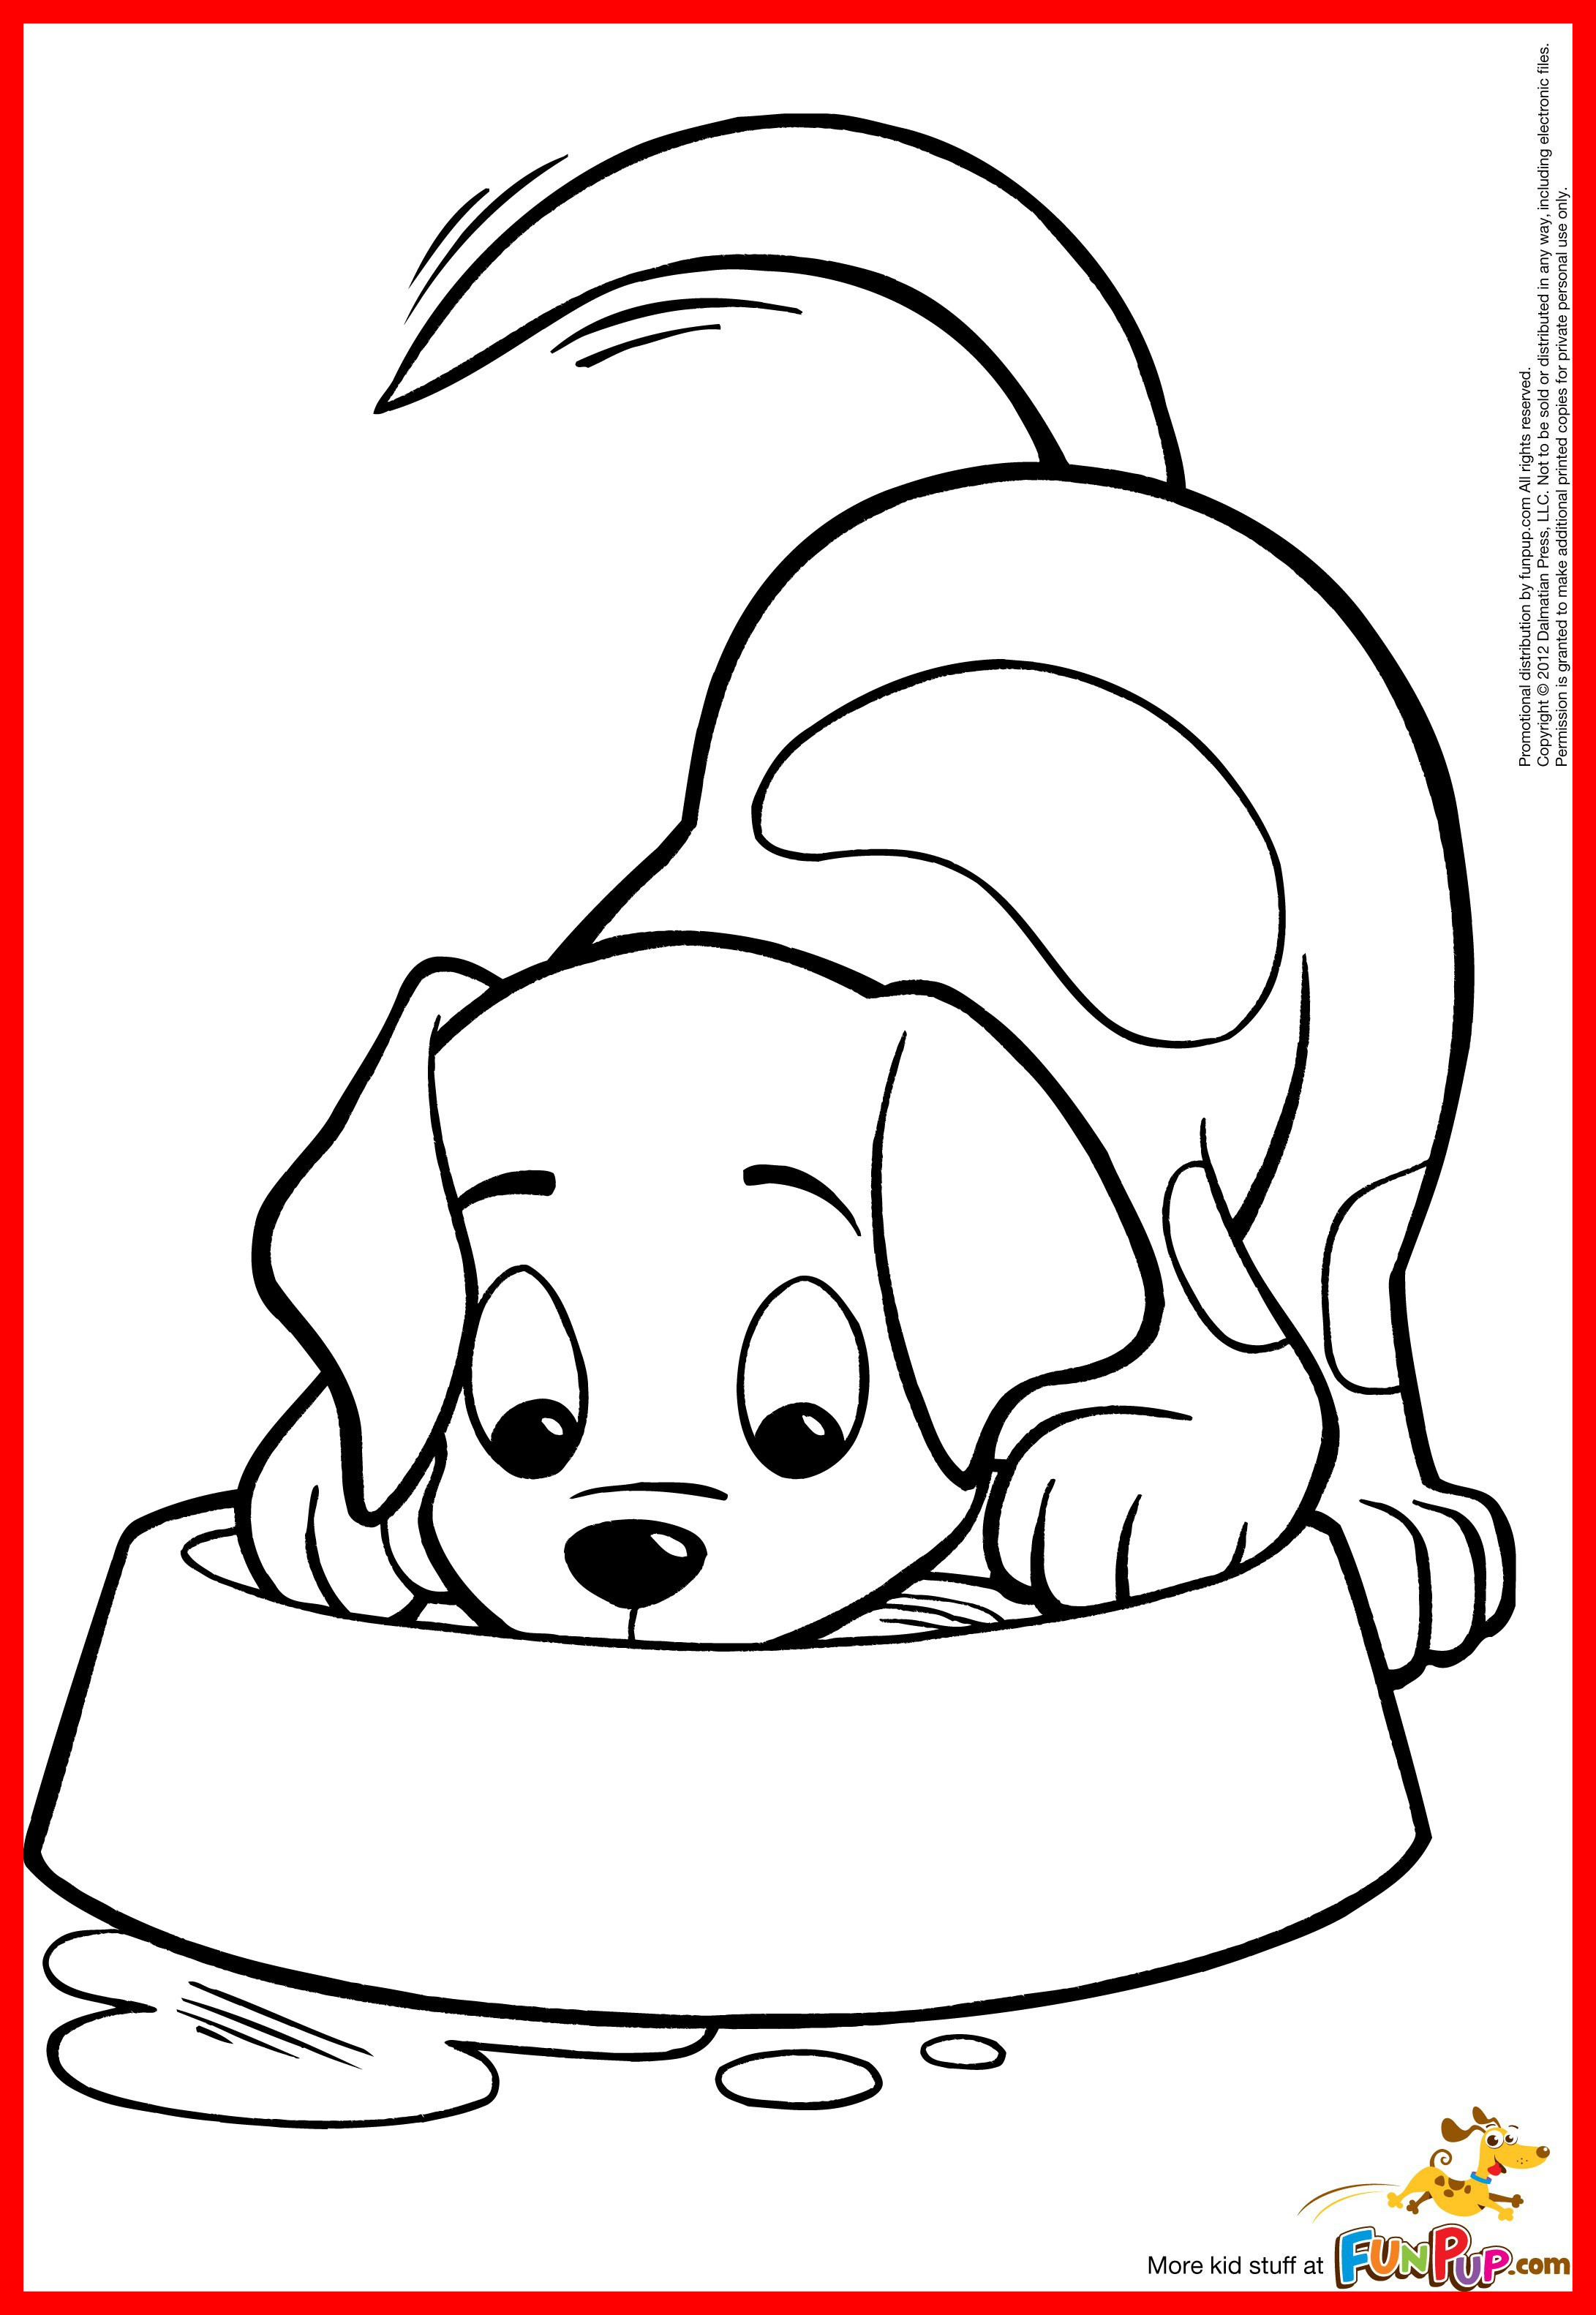 Puppy And Kitty Coloring Pages At Getdrawings | Free Download